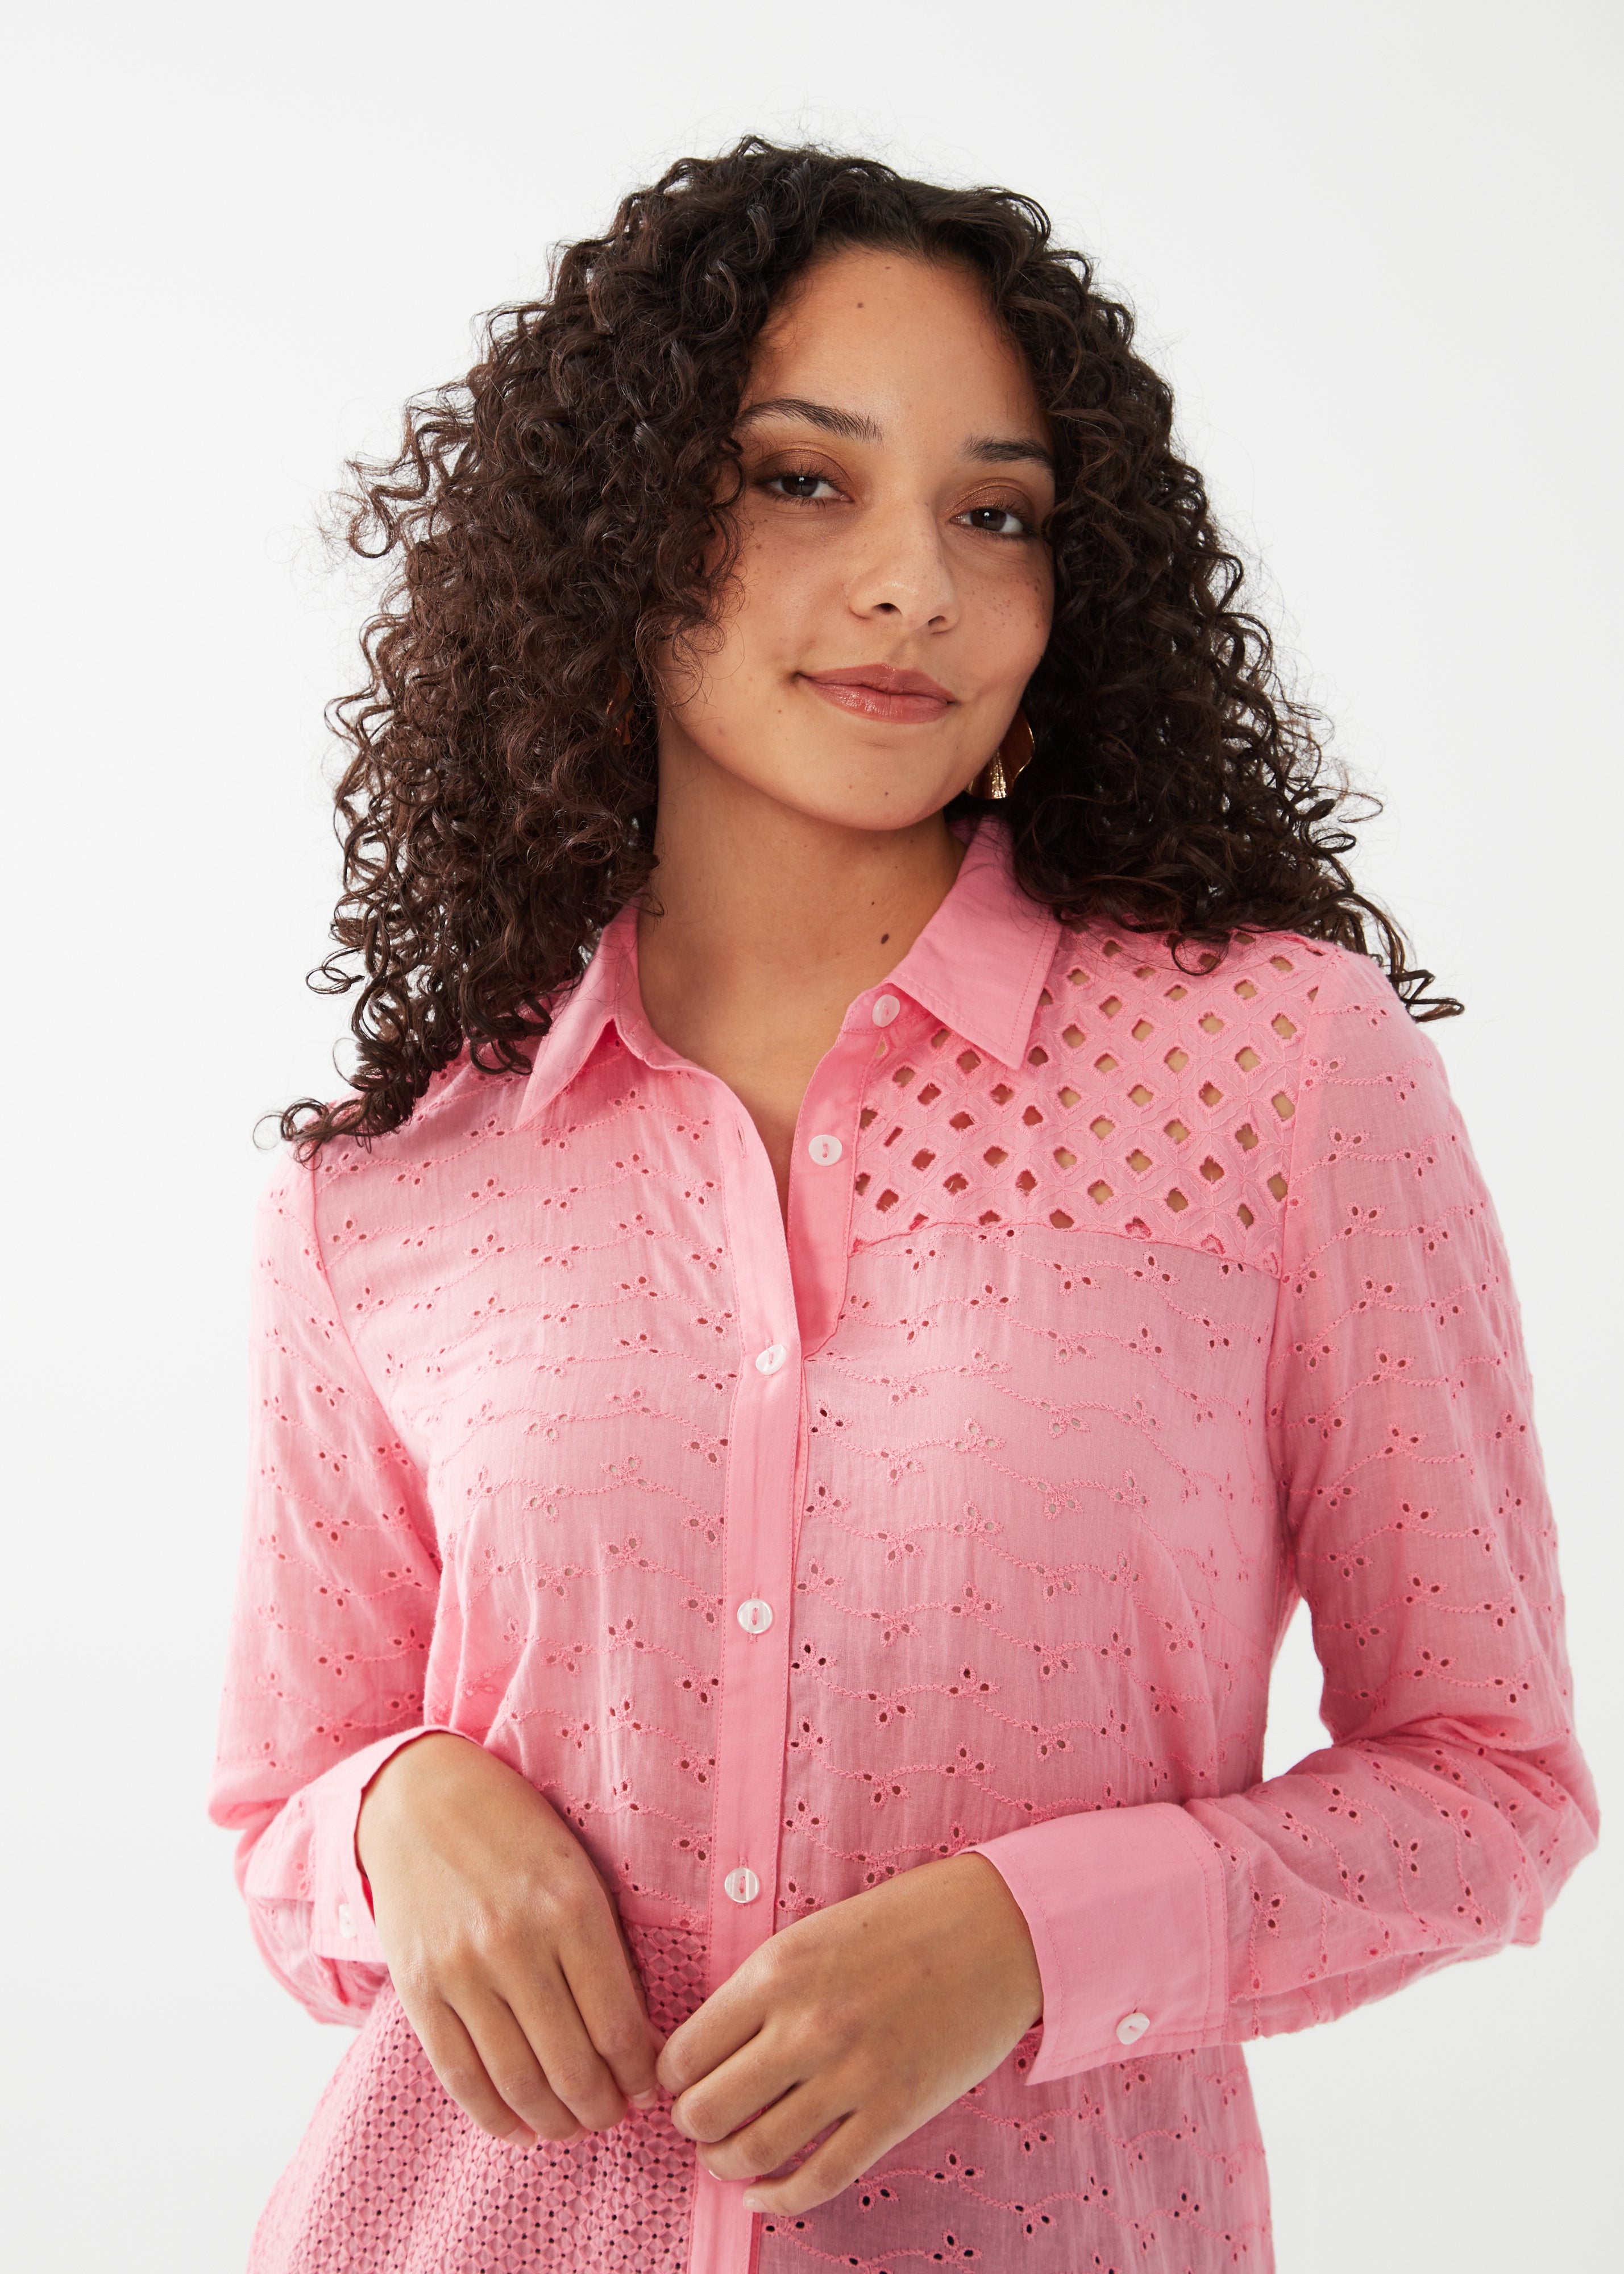 Experience the vibrant charm of the FDJ Patchwork Eyelet Tunic Shirt in flamingo pink! Designed to stand out, this shirt adds a pop of colour to any outfit. Its unique patchwork and eyelet details make a statement while providing a comfortable and flattering fit. Radiate confidence and style with this eye-catching shirt.